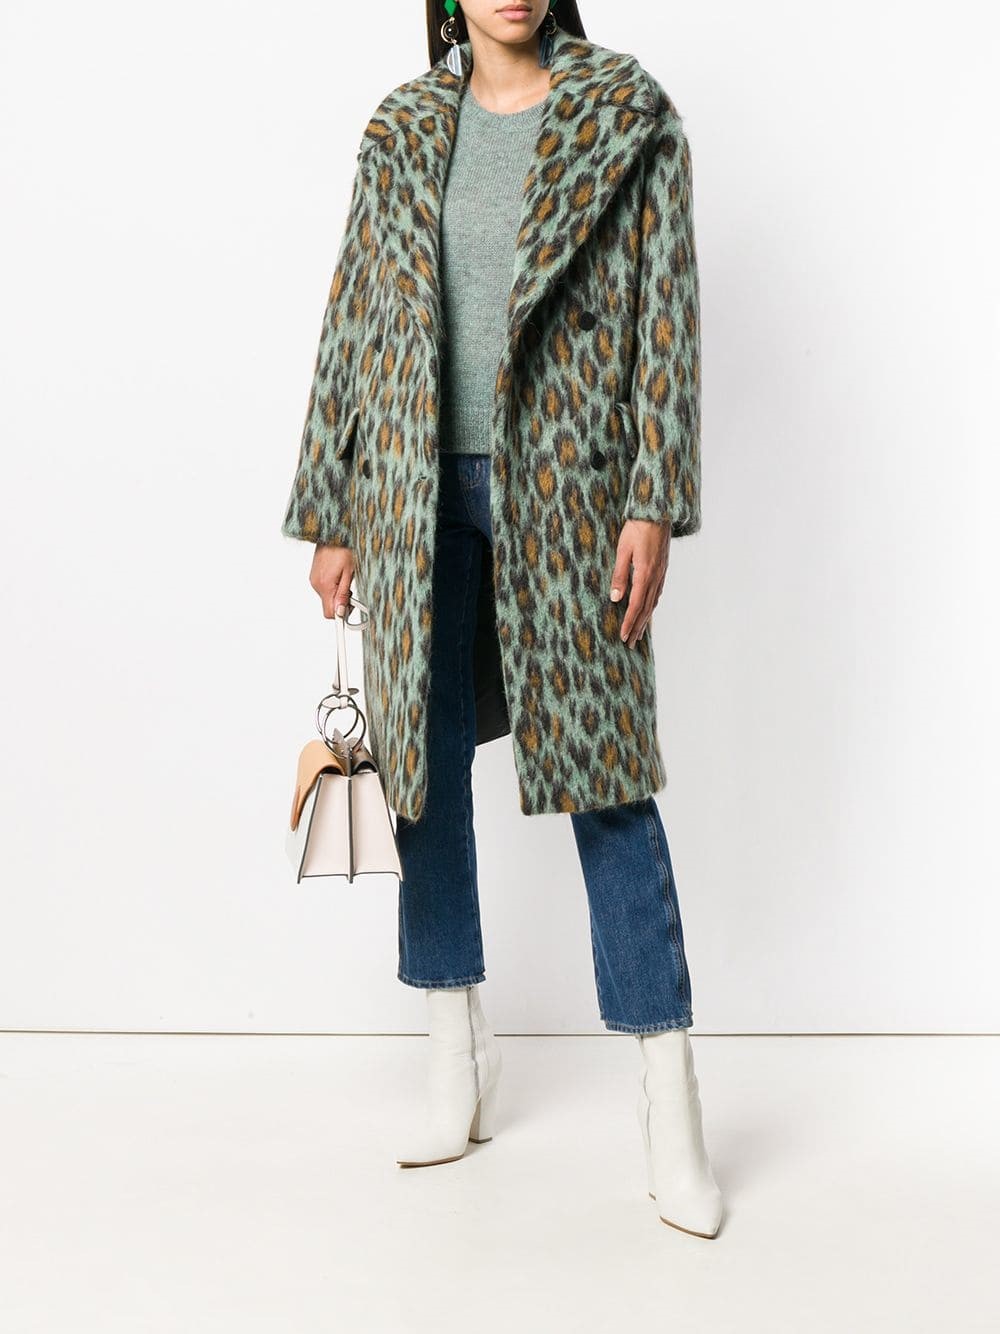 kenzo LEOPARD PRINT COAT available on 